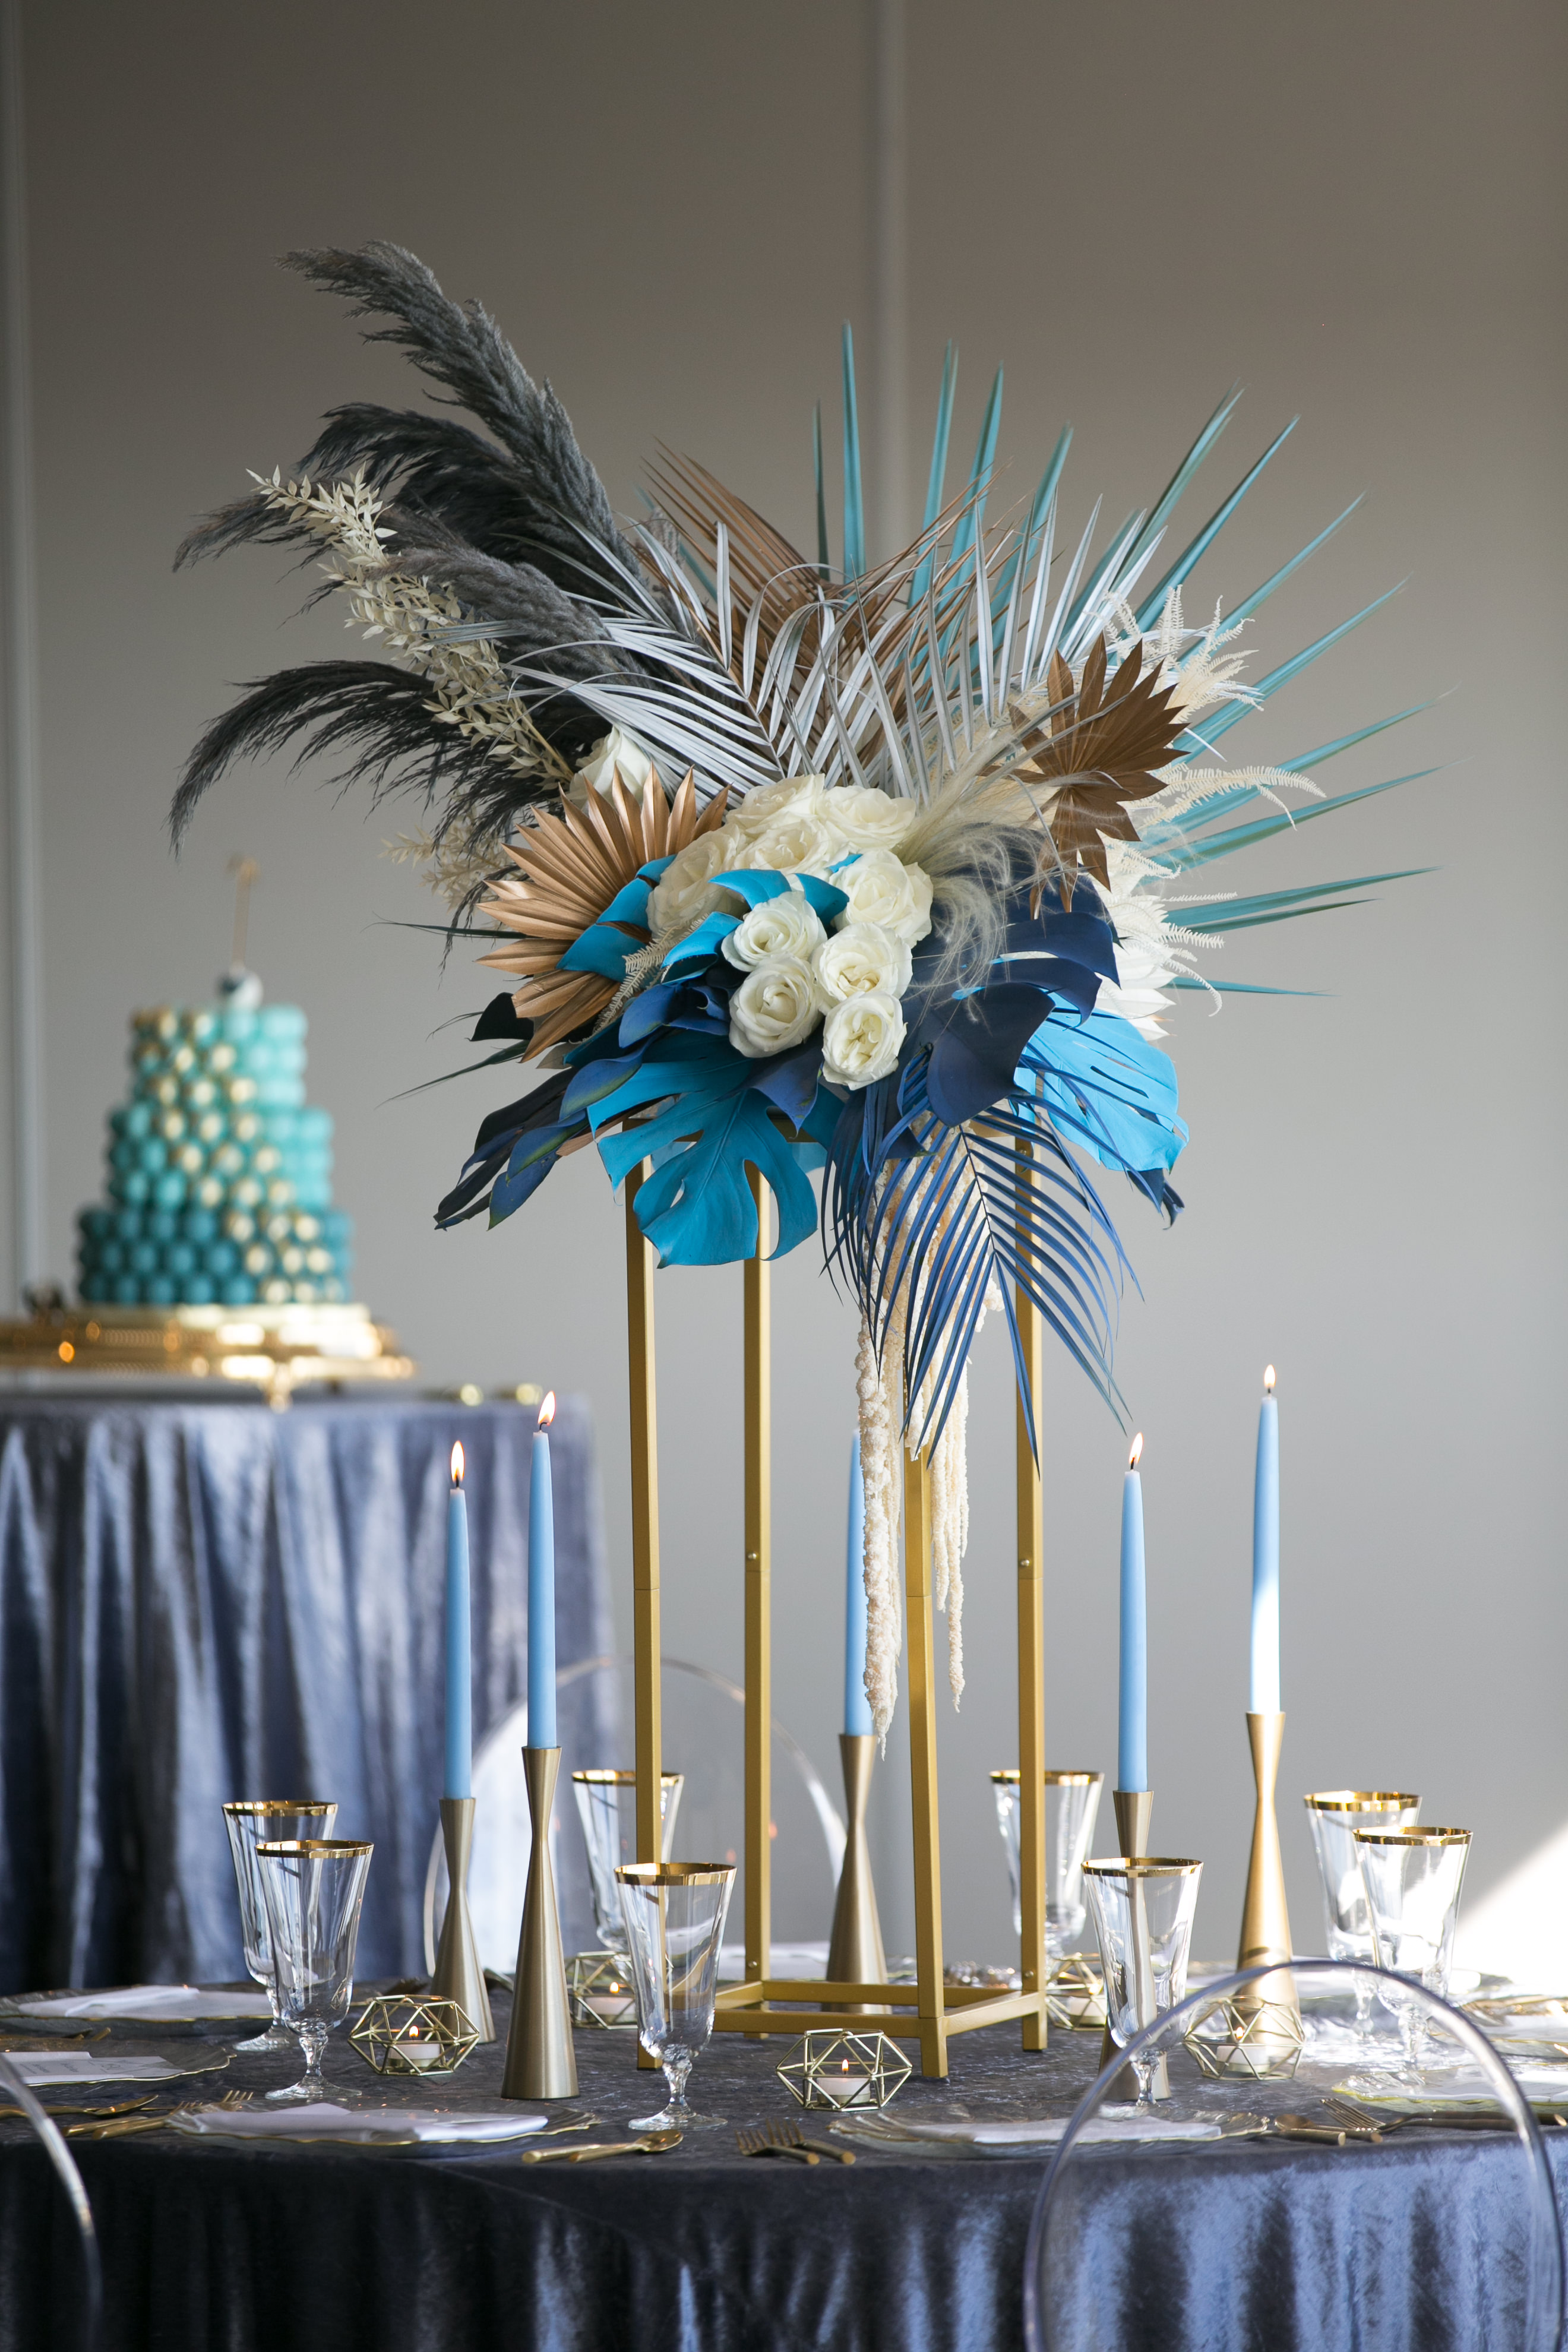 Whimsical Unique Tropical Wedding Reception Decor, Round Tables with Midnight Blue Linen, Tall Gold Candlesticks with Blue Candles, Tall Gold Geometric Stands with White Roses, Blue Monstera and Palm Tree Leaves and Feathers and Ghost Chair Seating | Tampa Wedding Chair Rentals Gabro Event Services | Velvet Navy Blue Table Linens Kate Ryan Event Rentals | Wedding Photographer Carrie Wildes Photography | Wedding Planner and Florist John Campbell Weddings | Tampa Wedding Venue Centre Club